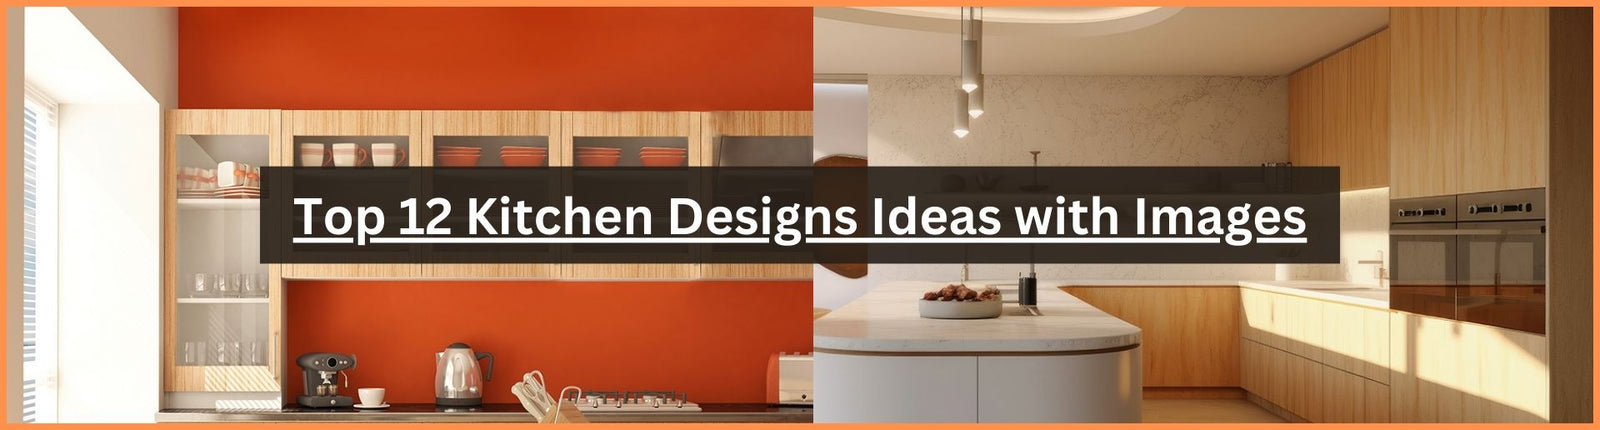 Top 12 Kitchen Designs Ideas with Images